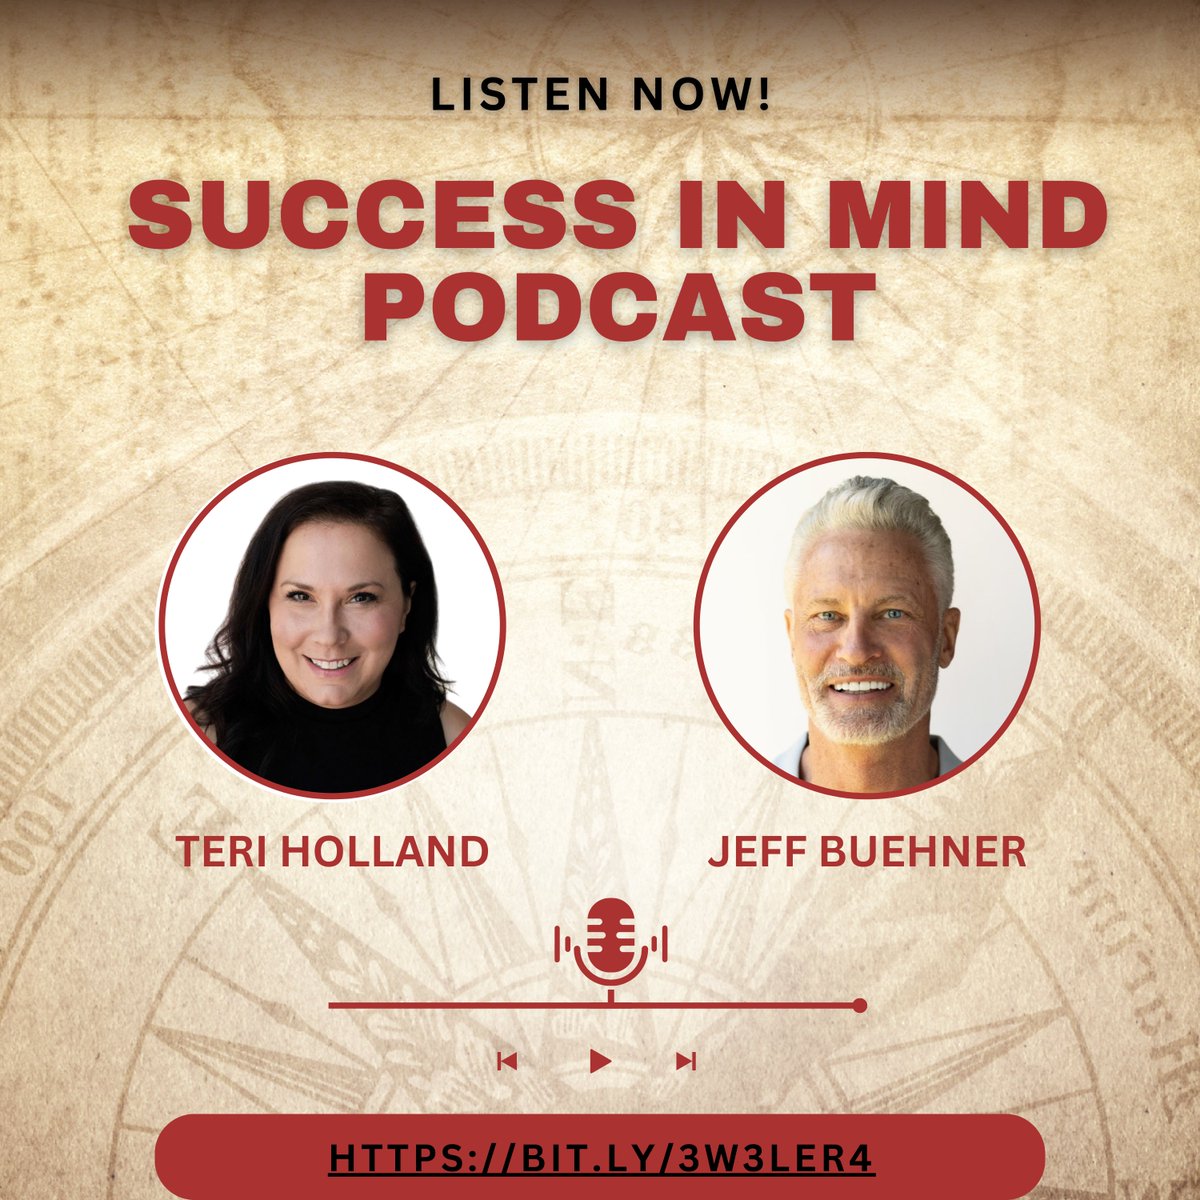 I invite you to check out my episode on the Success in Mind Podcast with @TheTeriHolland, where we talk about the power of the subconscious mind. Discover practical tips to unlock success and fulfillment in every aspect of your life. Watch here now: bit.ly/3W3leR4